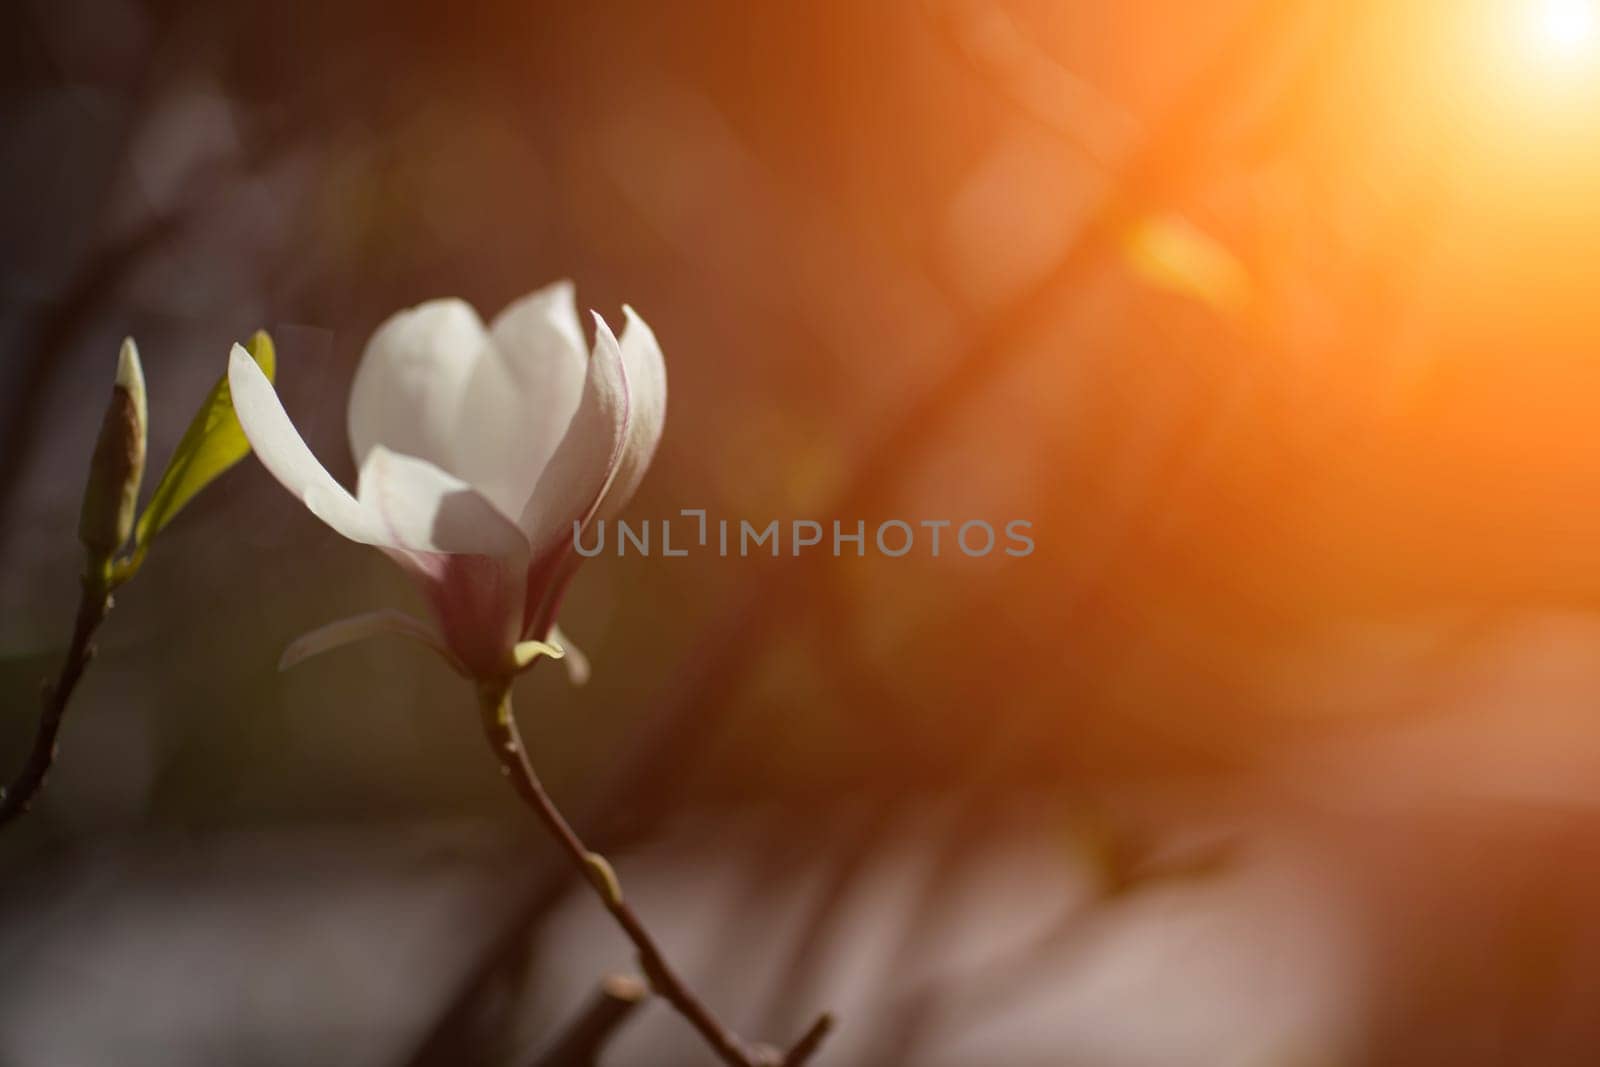 White Magnolia flower blooming on background of blurry white Magnolia on Magnolia tree.